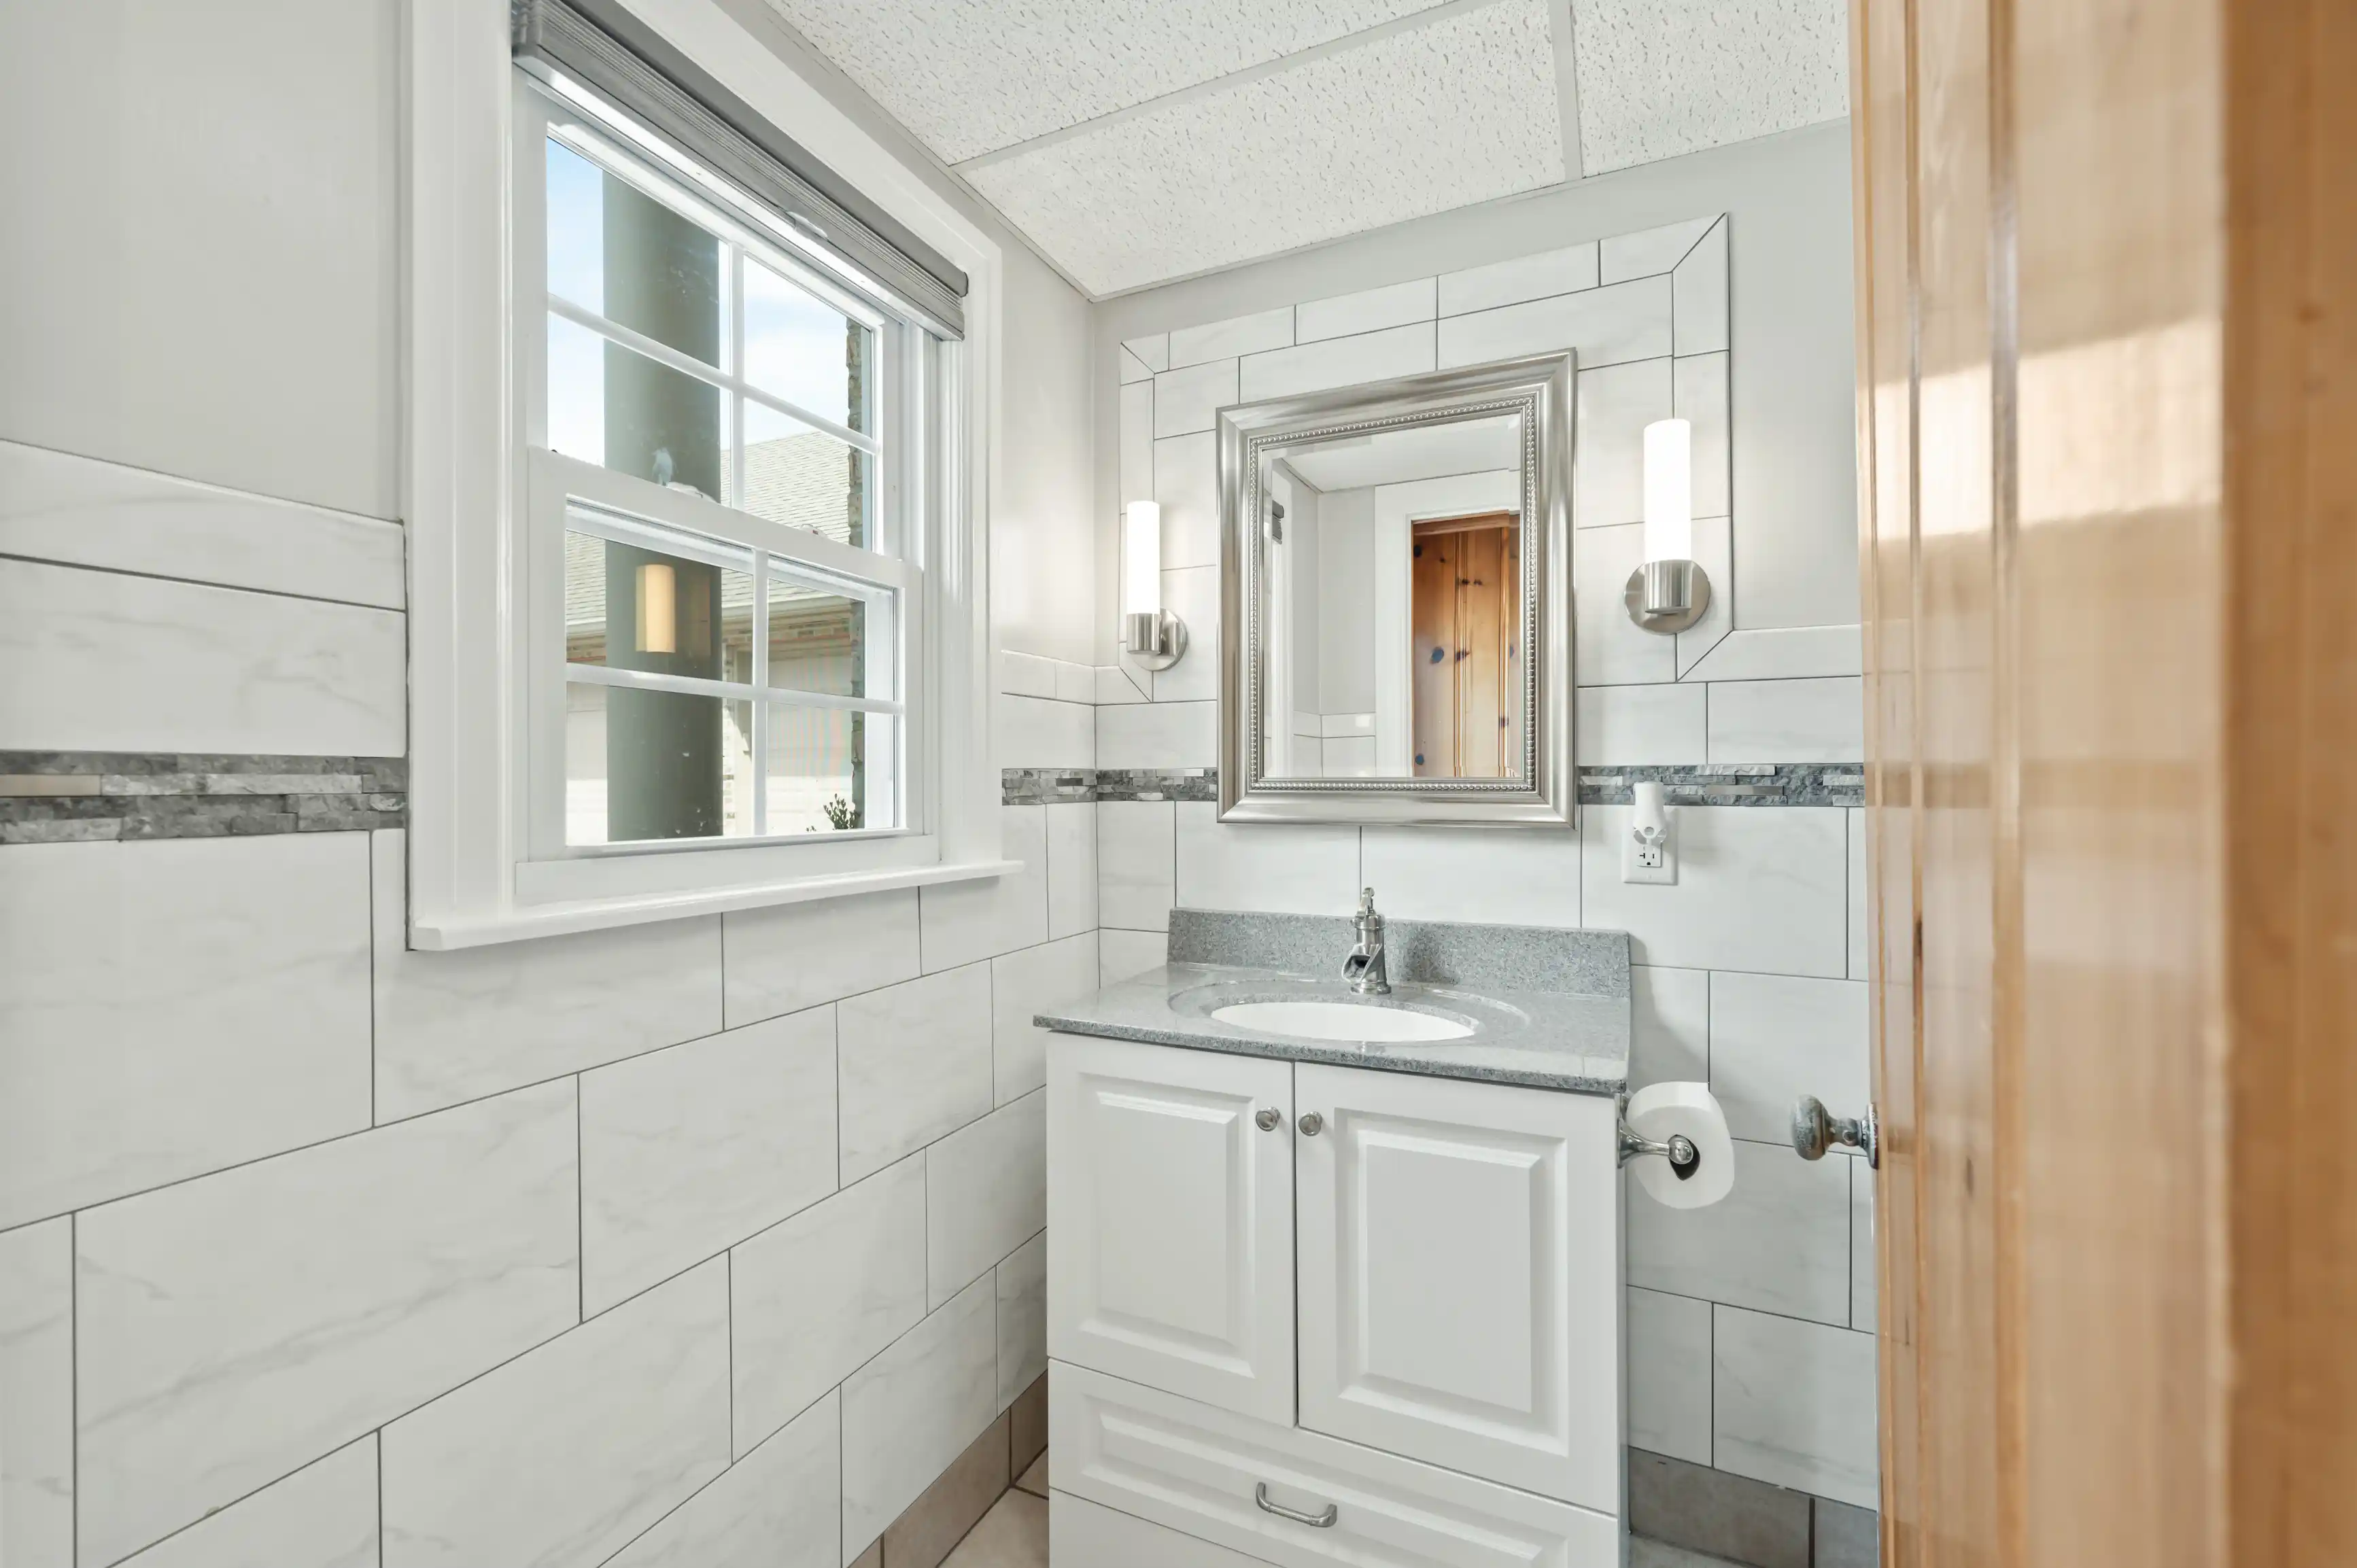 Bright bathroom interior with a large window, subway tiled walls, a vanity with a mounted sink and mirror, and modern wall sconces.